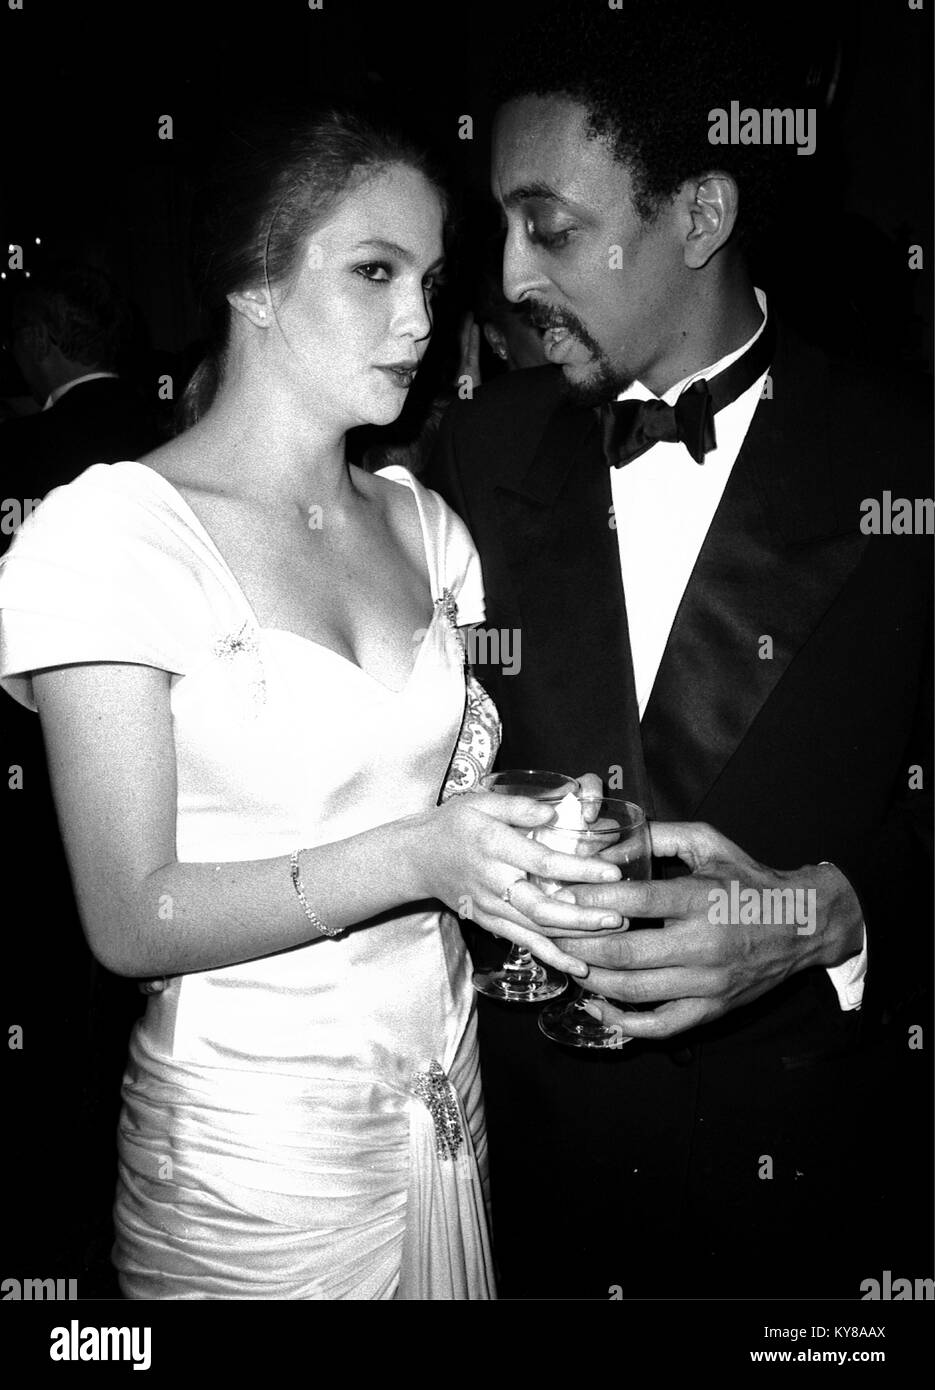 Gregory Hines and Diane Lane Attending the Cotton lub Movie Premiere Party at Grace's Mansion, New York City. 1984 © RTMcbride / MediaPunch Stock Photo